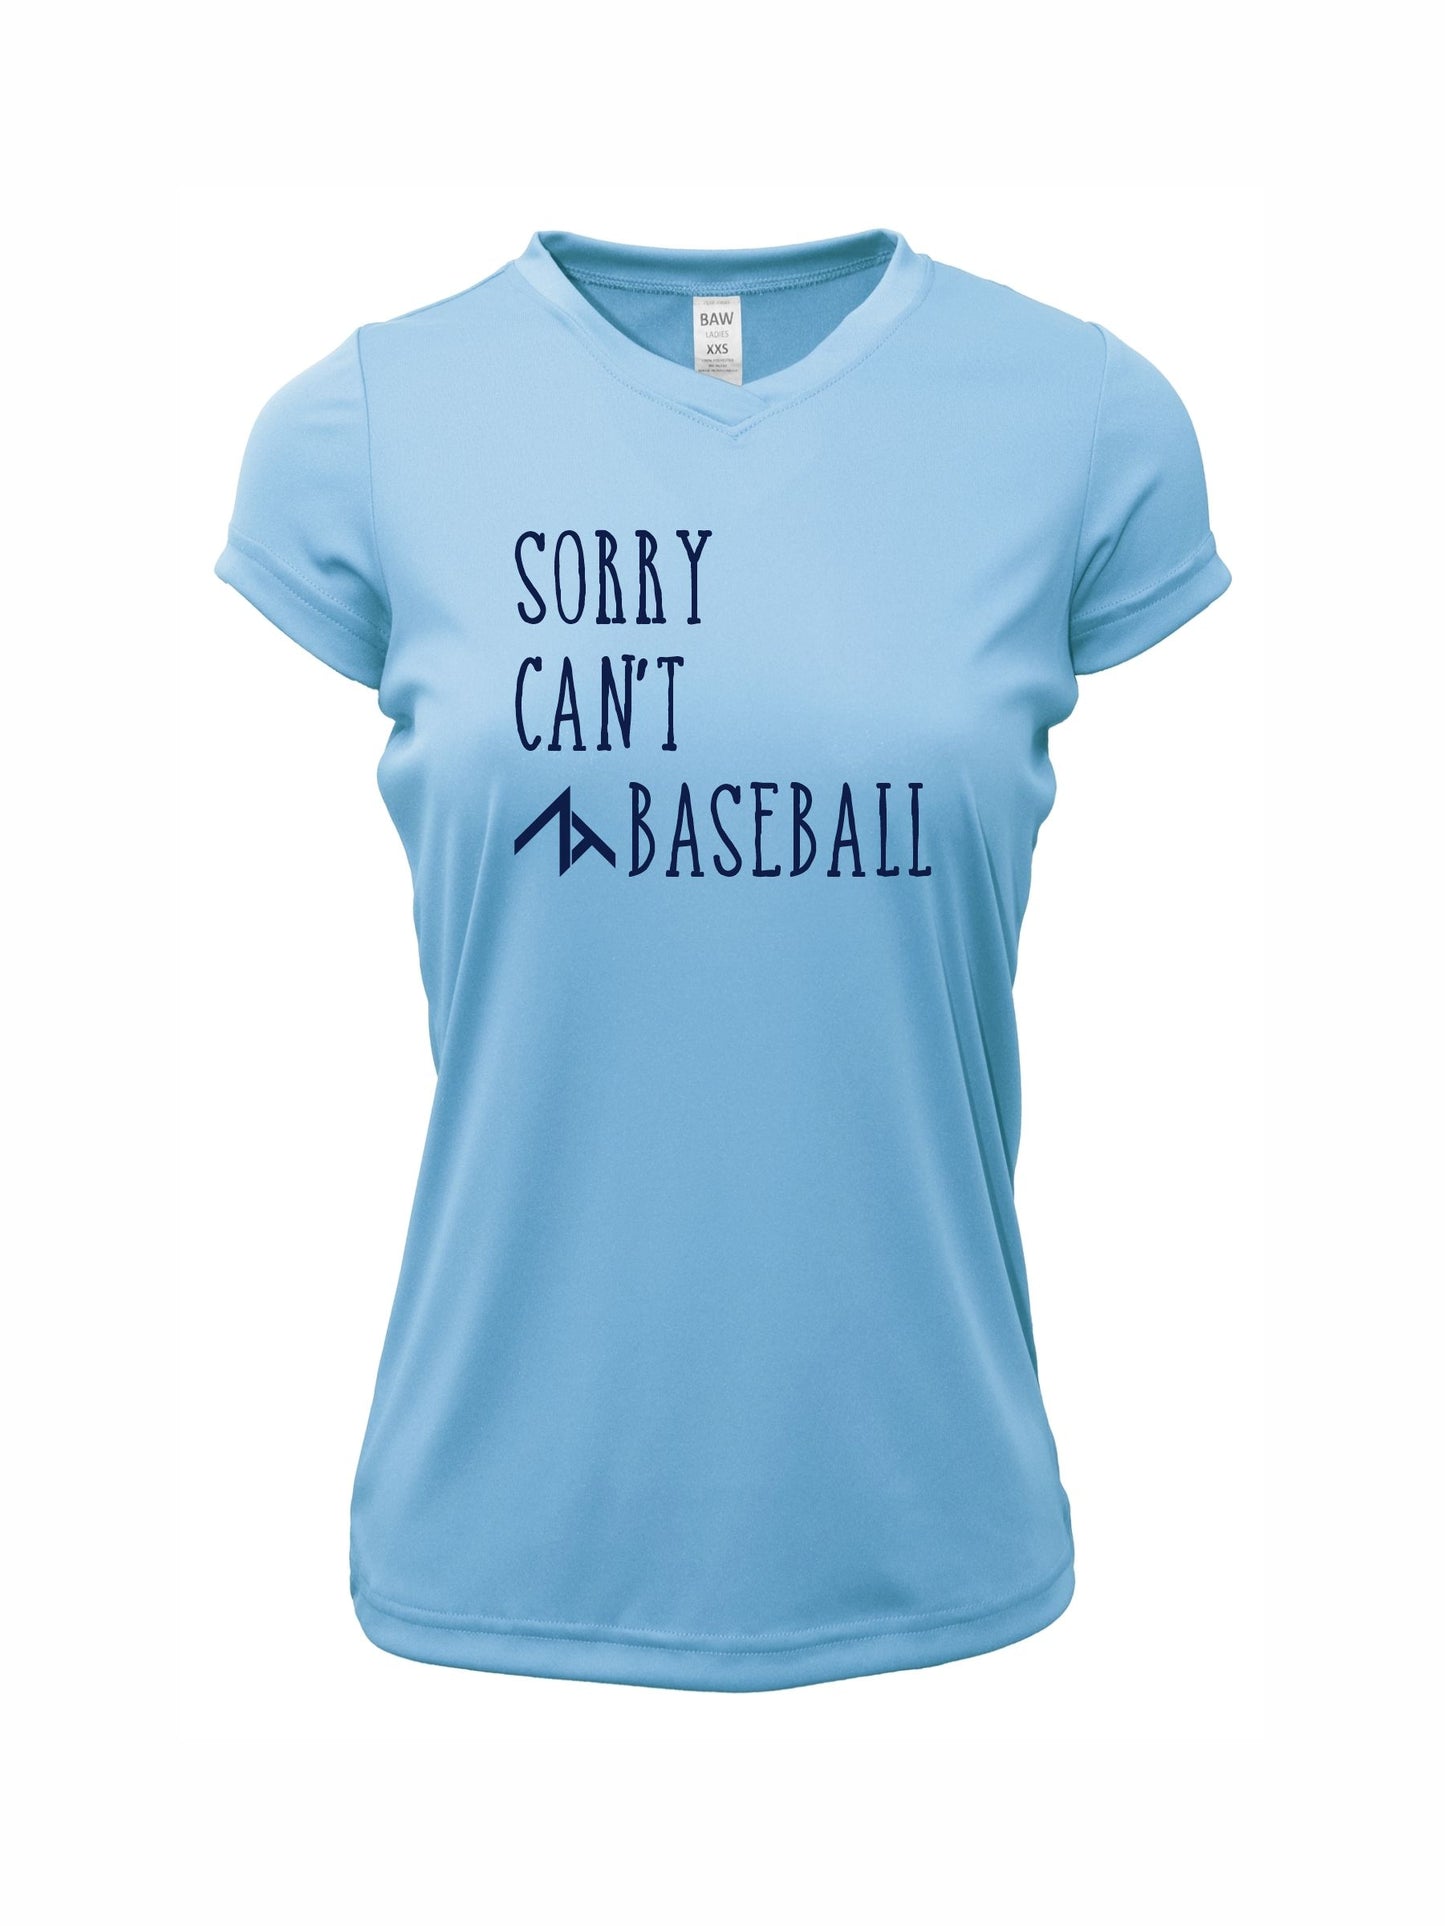 V-Neck Short Sleeve "SORRY CAN'T" Dri-Fit T-shirt